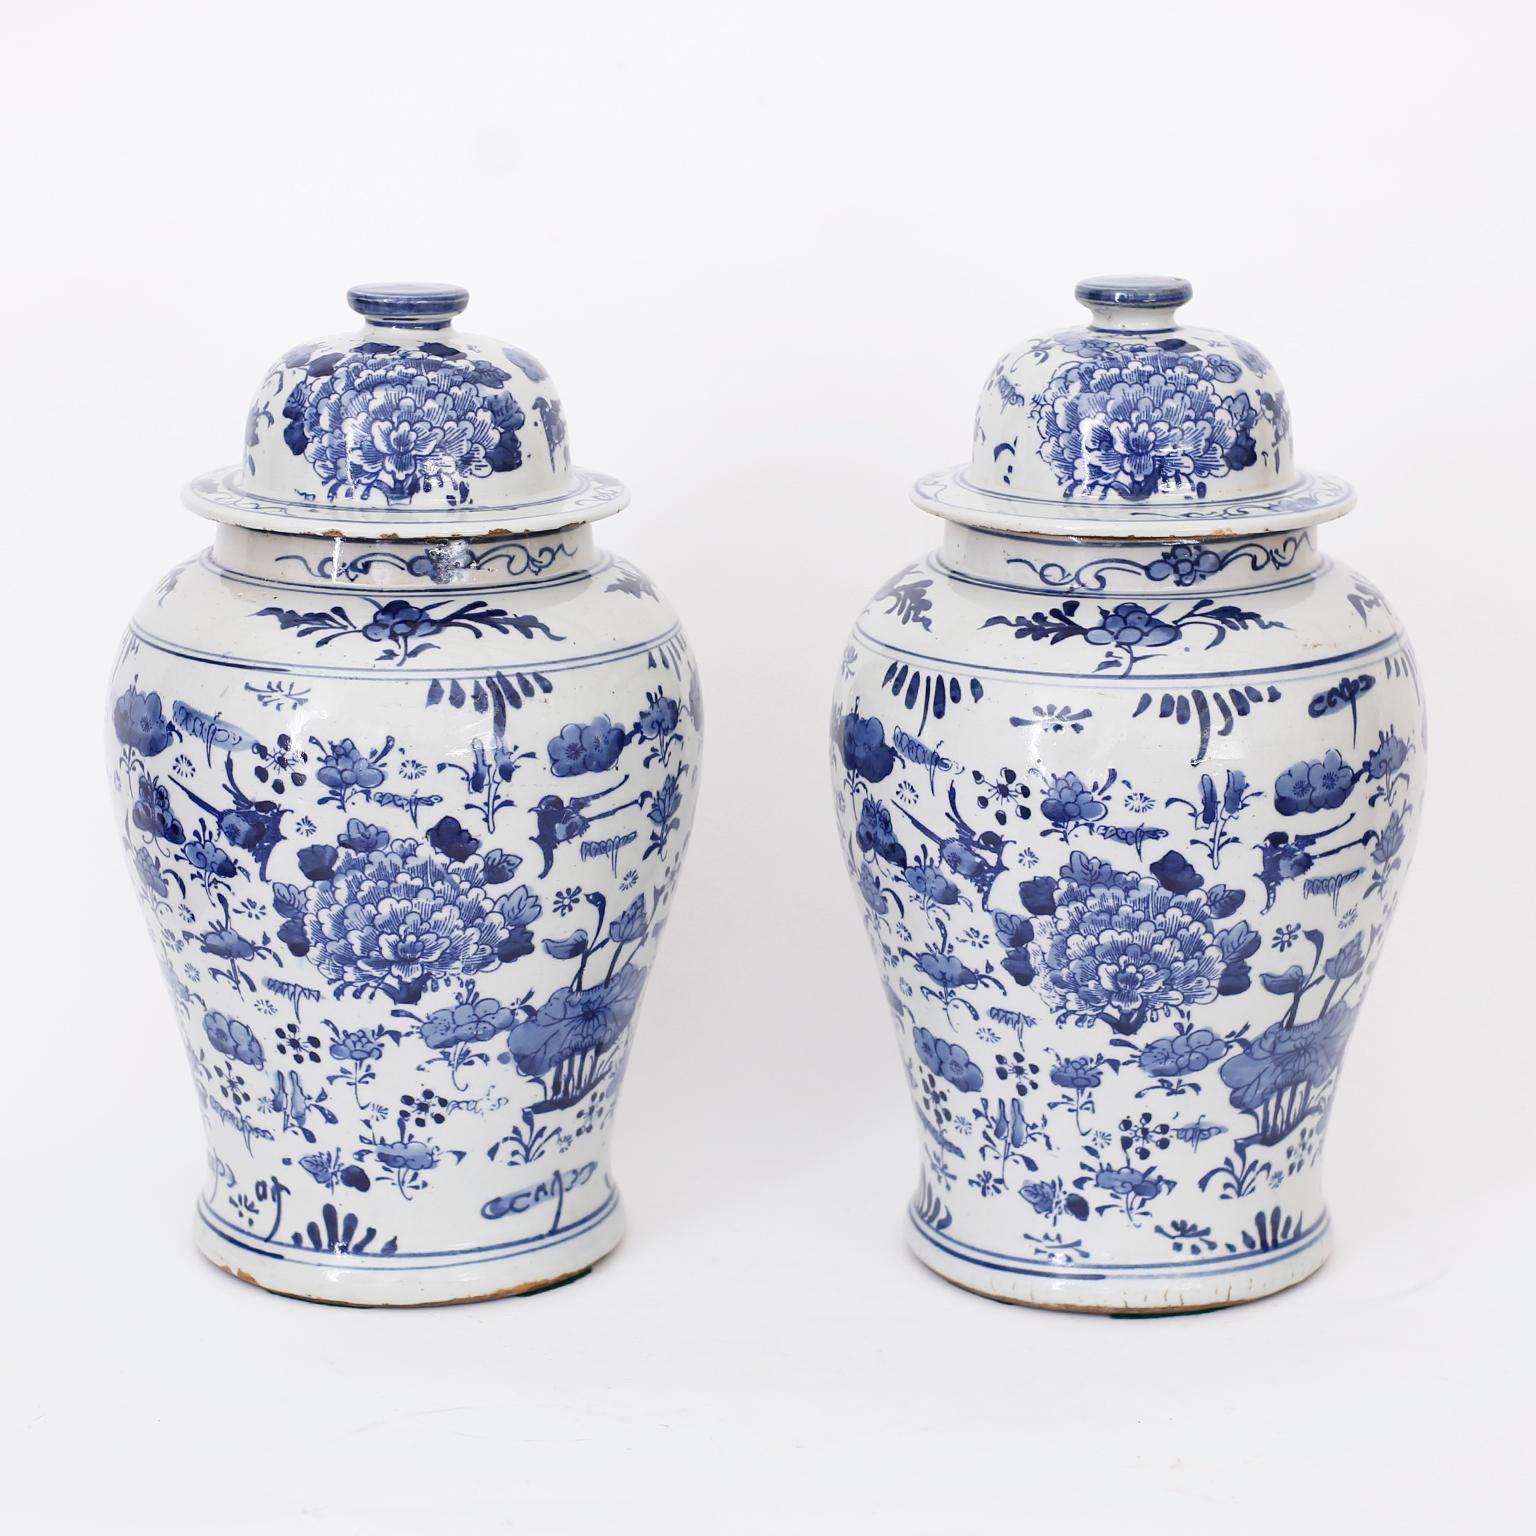 Pair of Chinese blue and white porcelain lidded ginger jars with Classic form hand decorated with waterlilies and asserted flowers all around.